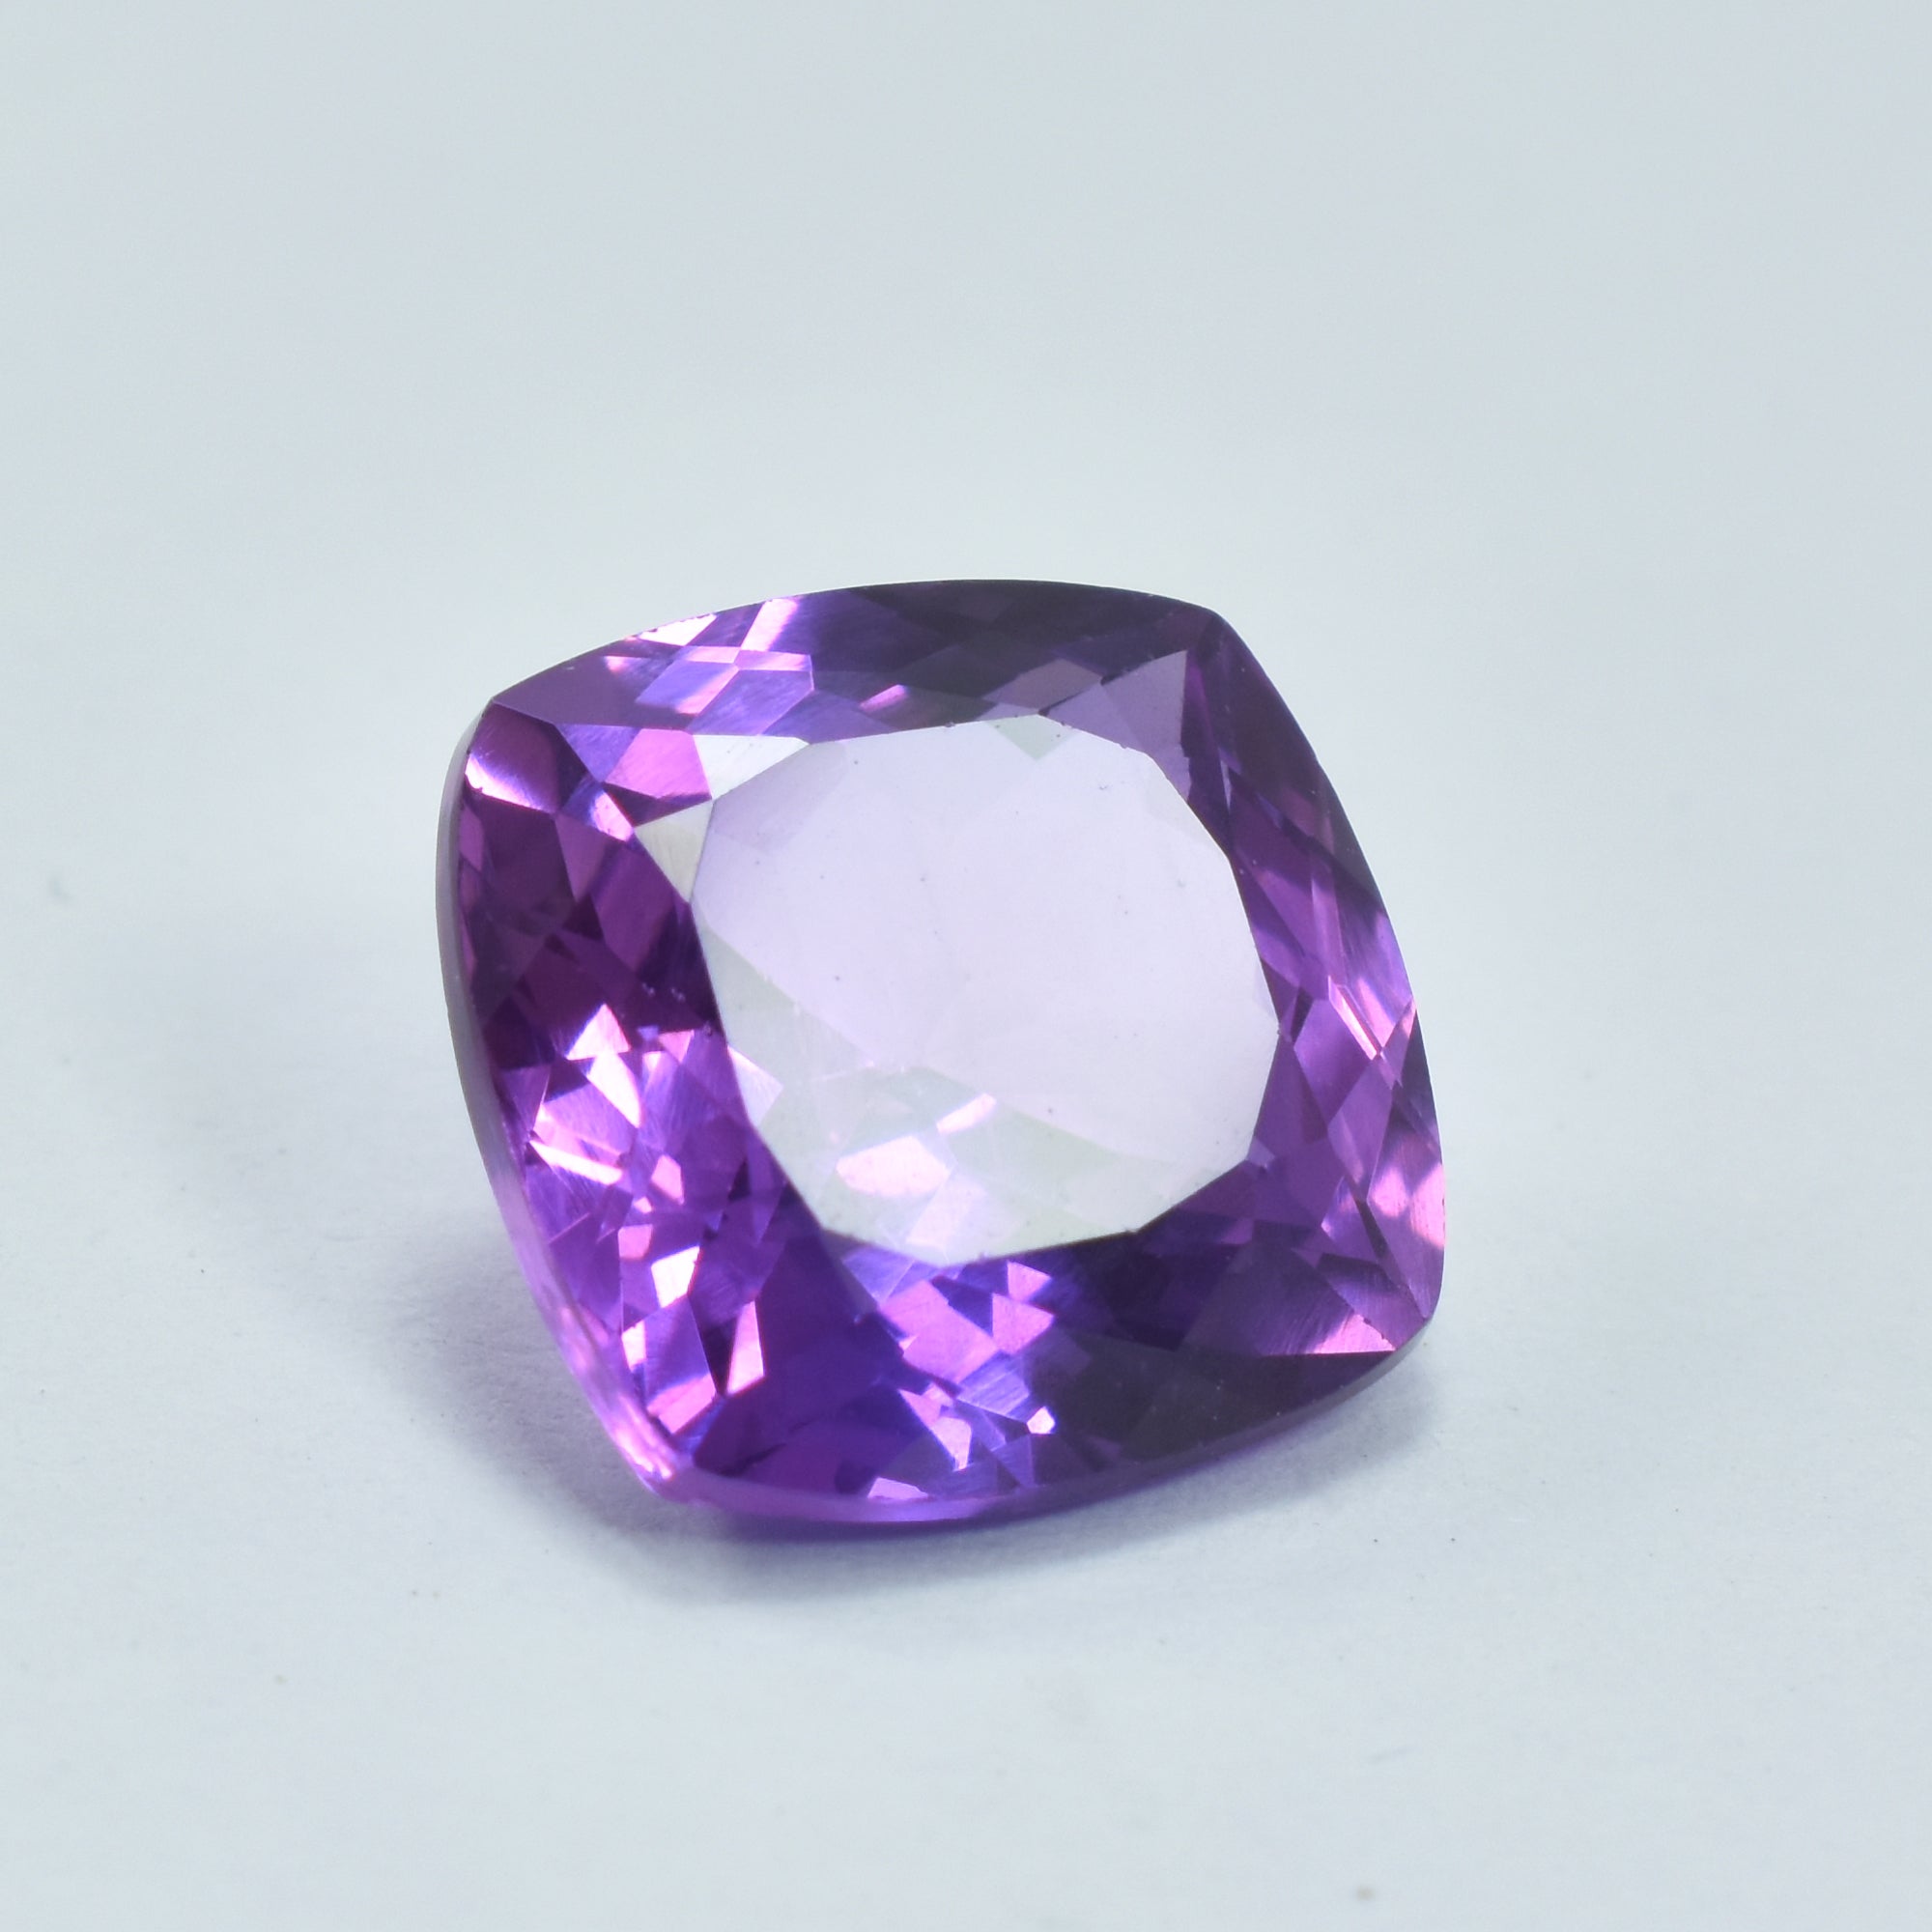 Beautiful Square Cushion Cut Purple Sapphire 8.65 Carat Natural Certified Loose Gemstone Color Change Gem | Free Shipping Free Gift | Best Offer